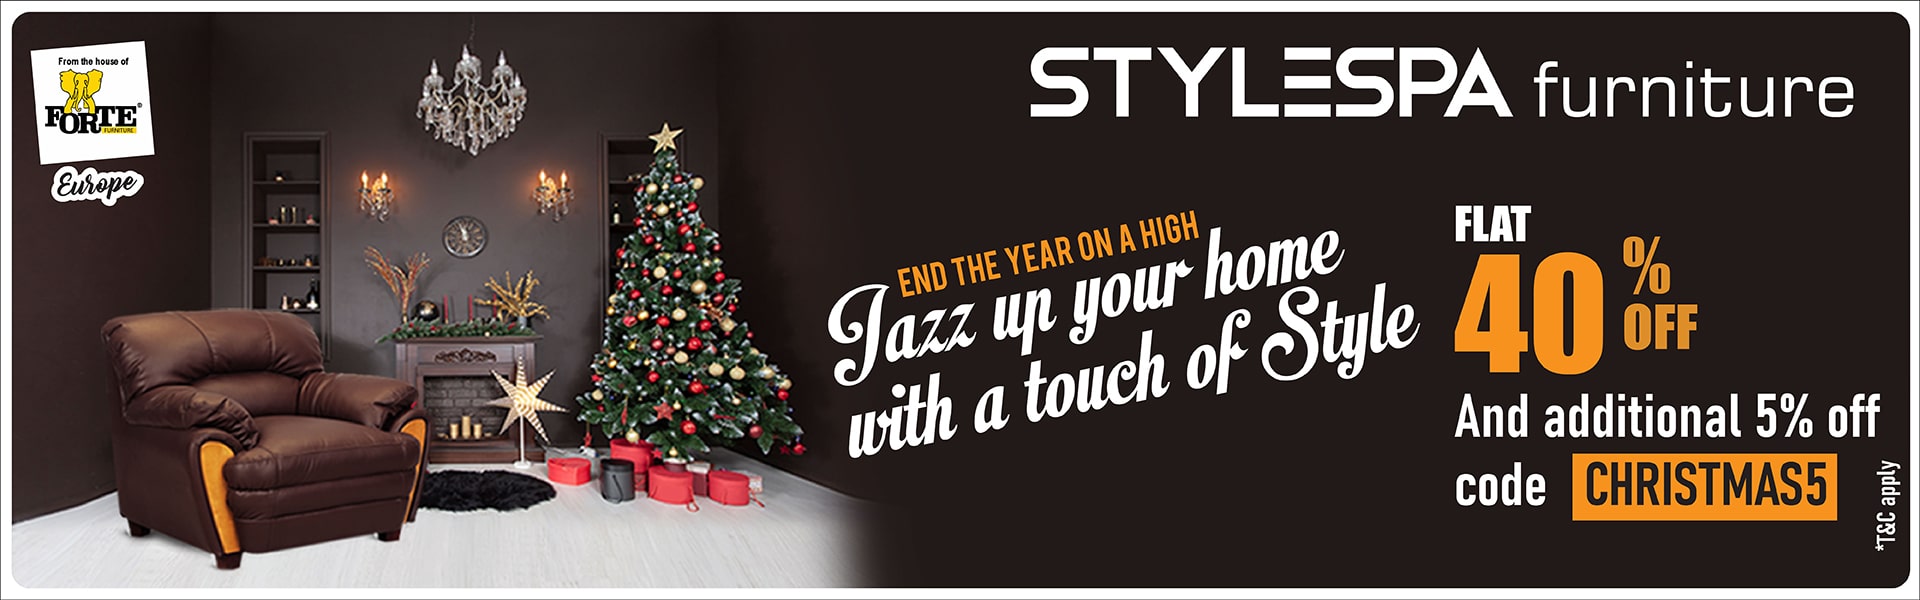 CHIRSTMAS OFFER – STYLESPA FURNITURES